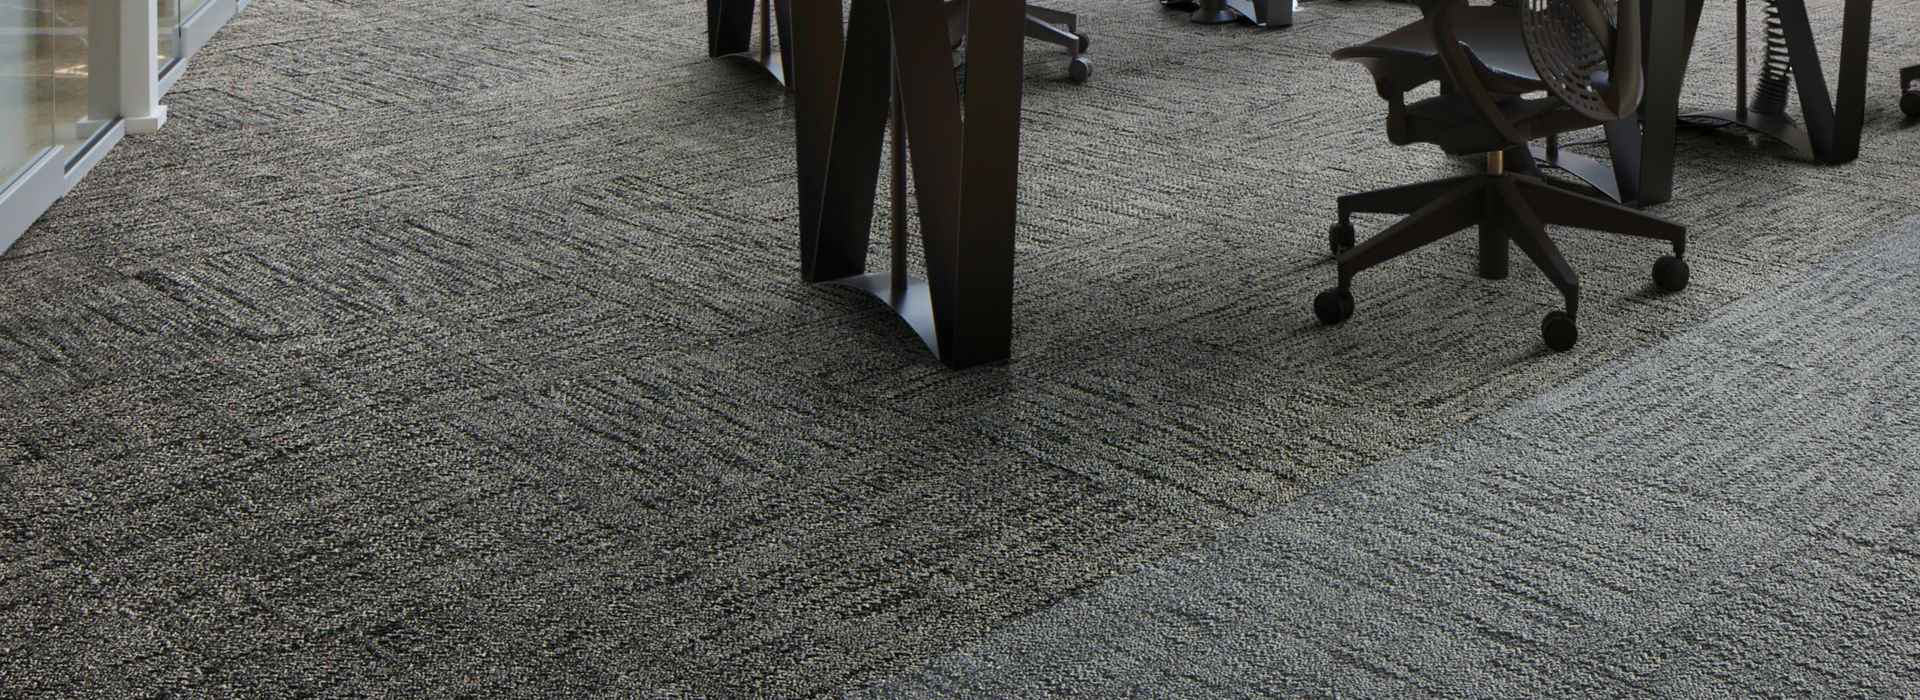 Interface Mirror Mirror carpet tile in open office space with tables and chairs imagen número 1